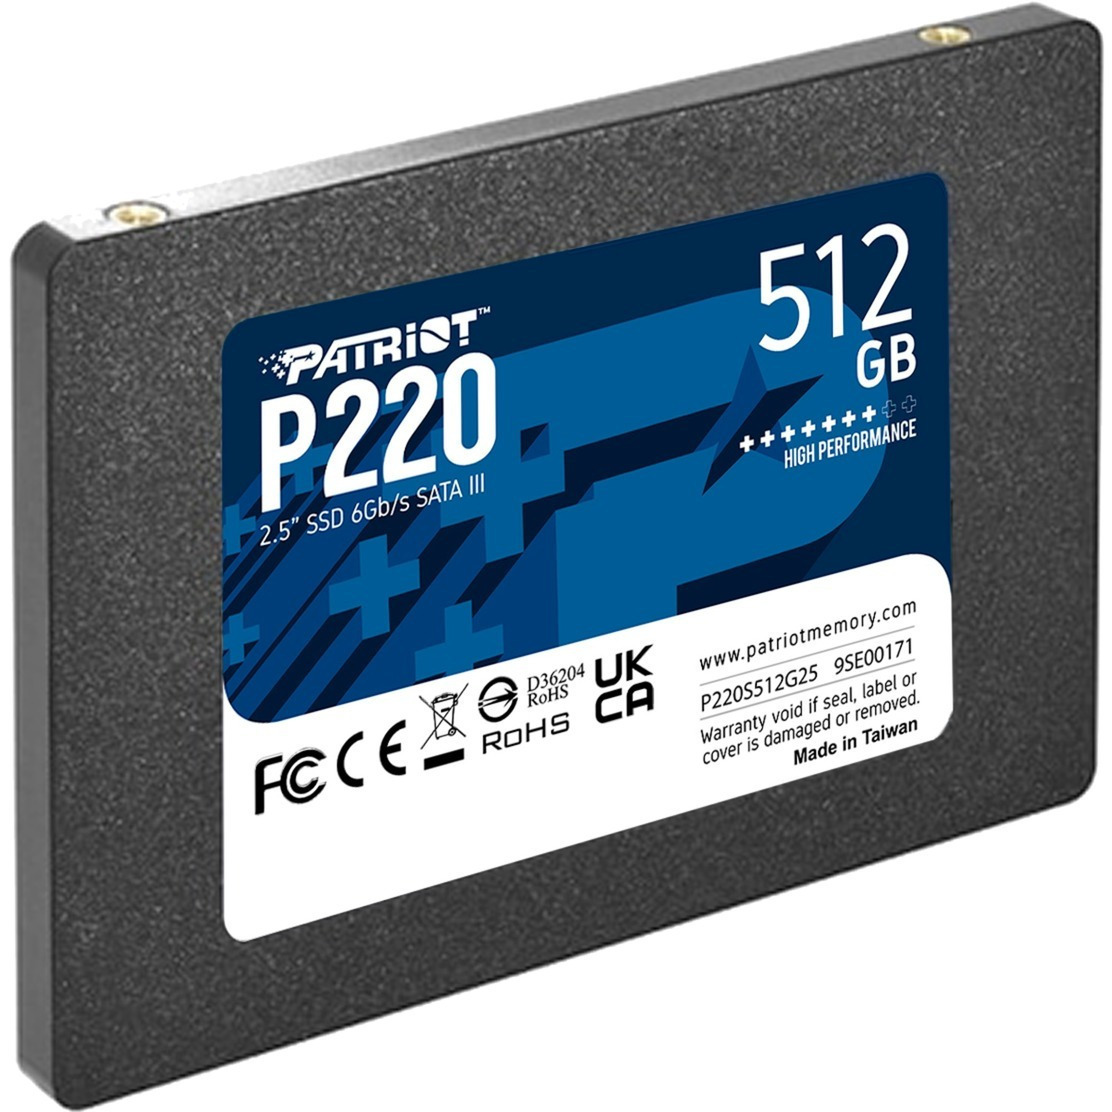 Intenso SSD 512GB 2.5 inches SSD SATA III Top Performance